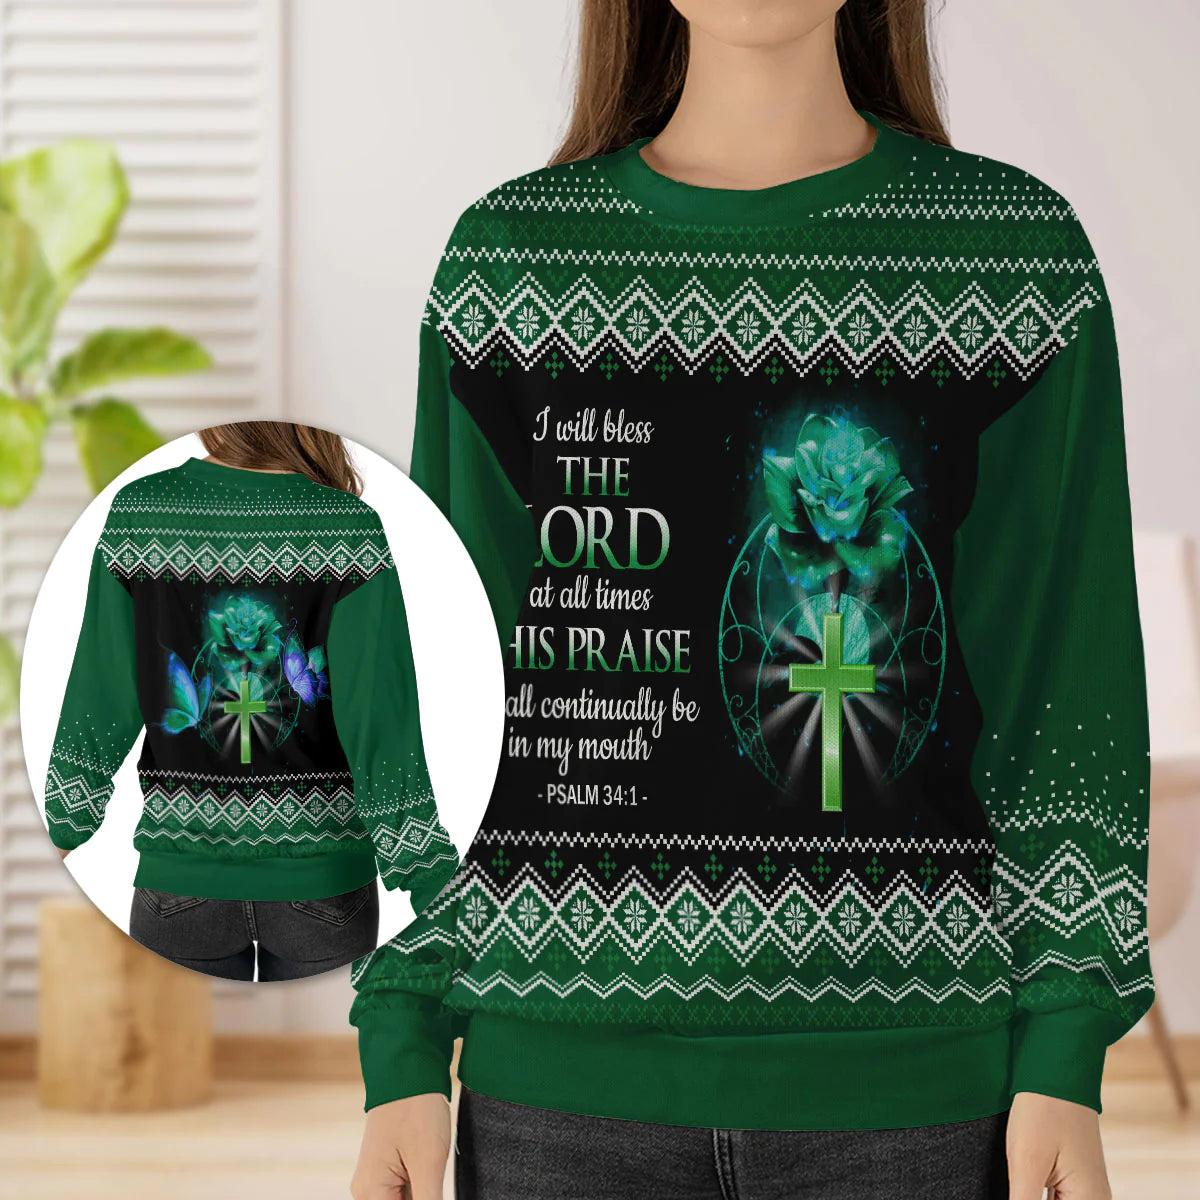 Christianartbag 3D Sweater, I Will Bless The Lord At All Times Psalm 34:1, Unisex Sweater, Christmas Gift. - Christian Art Bag